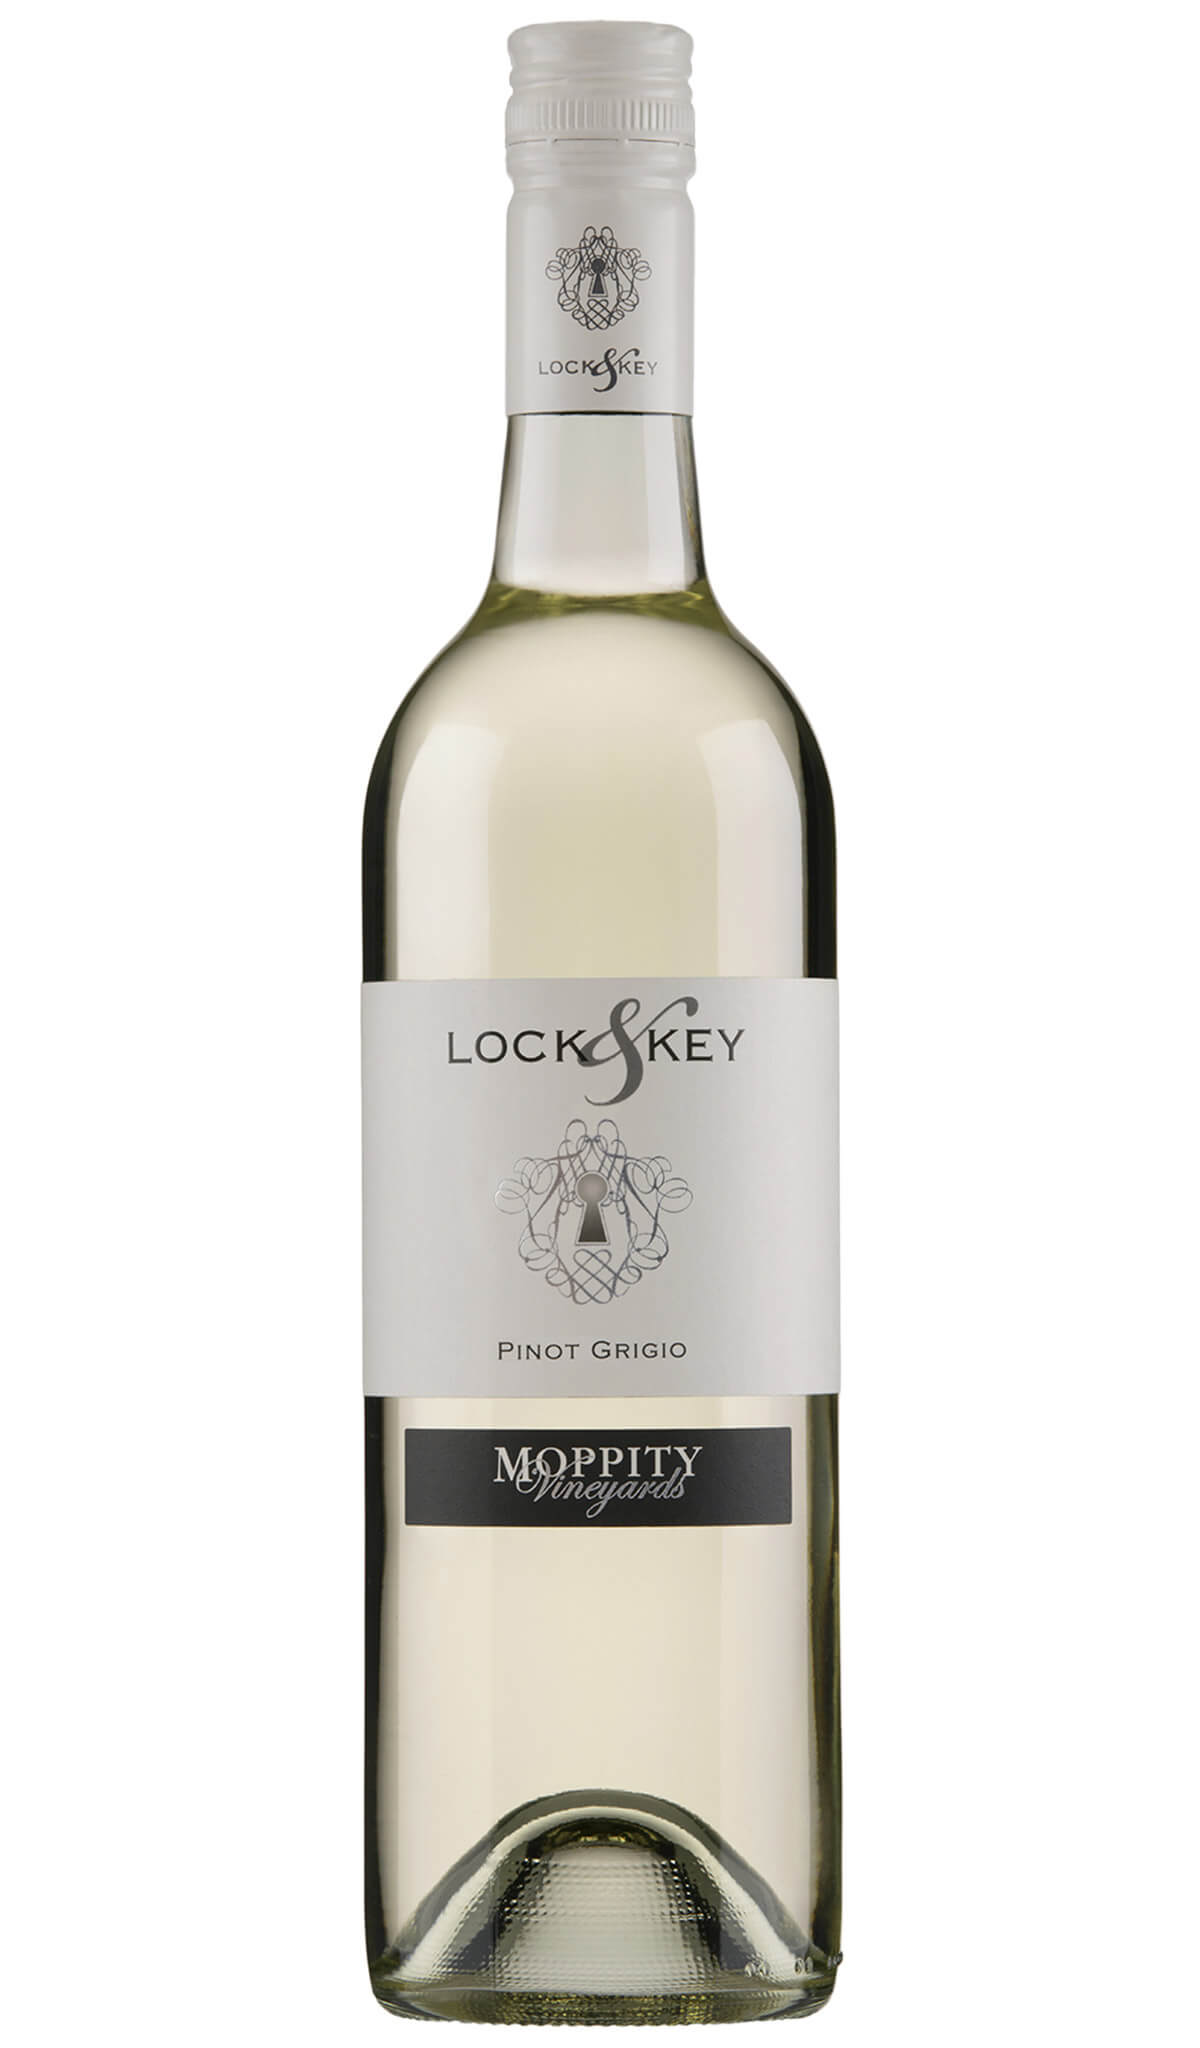 Find out more or buy Moppity Lock & Key Pinot Grigio 2023 online at Wine Sellers Direct - Australia’s independent liquor specialists.